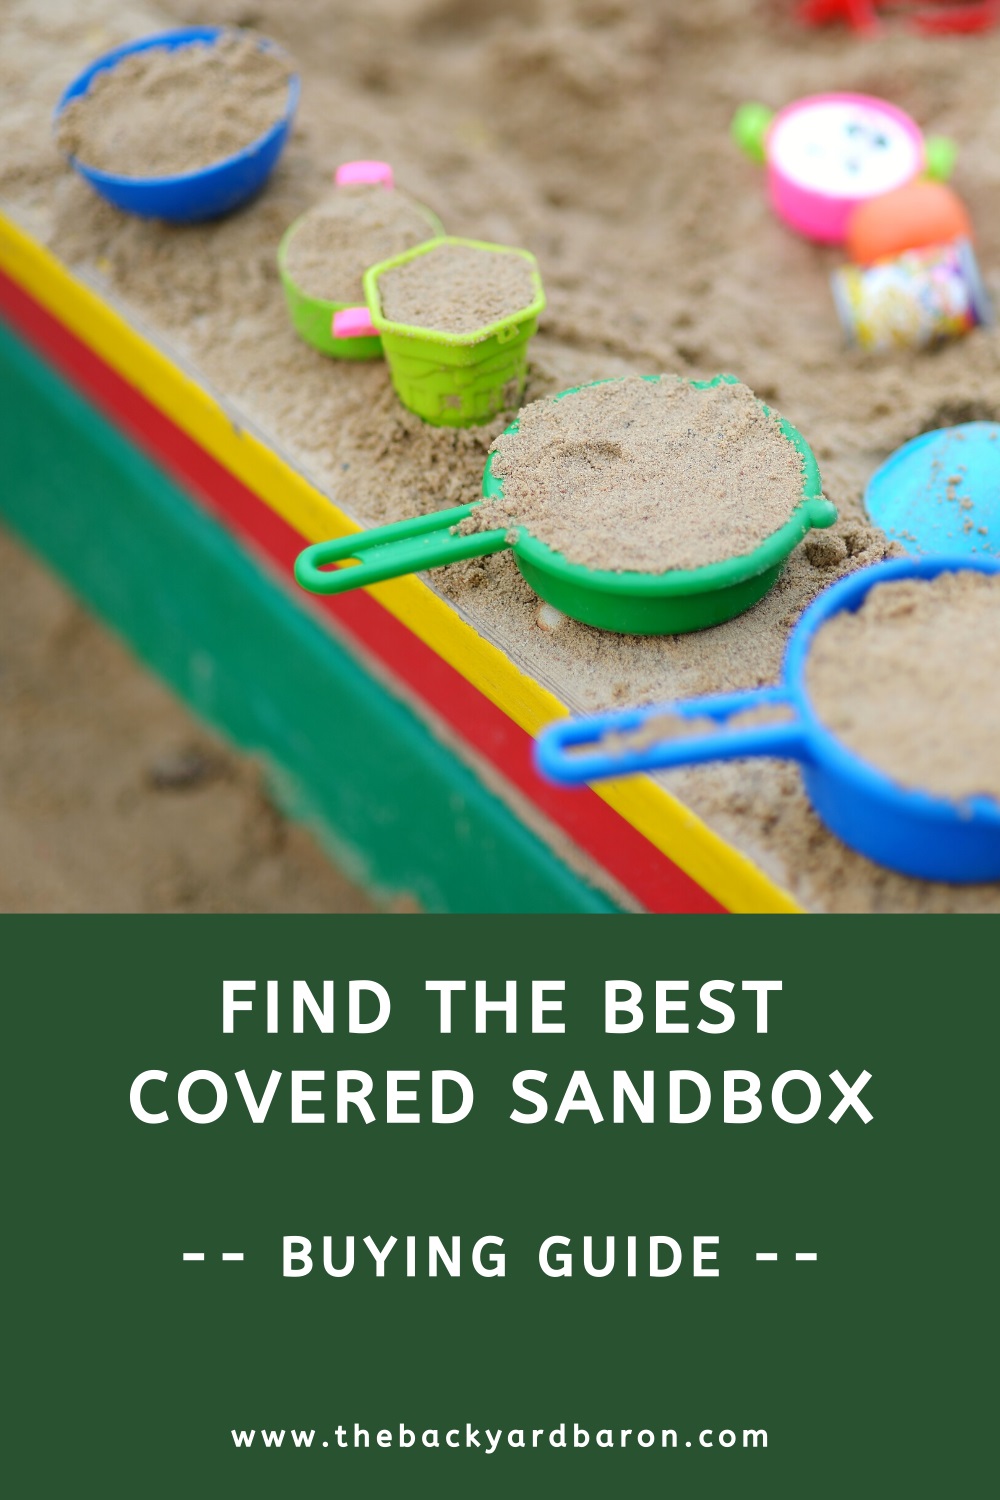 Sandbox with cover buying guide